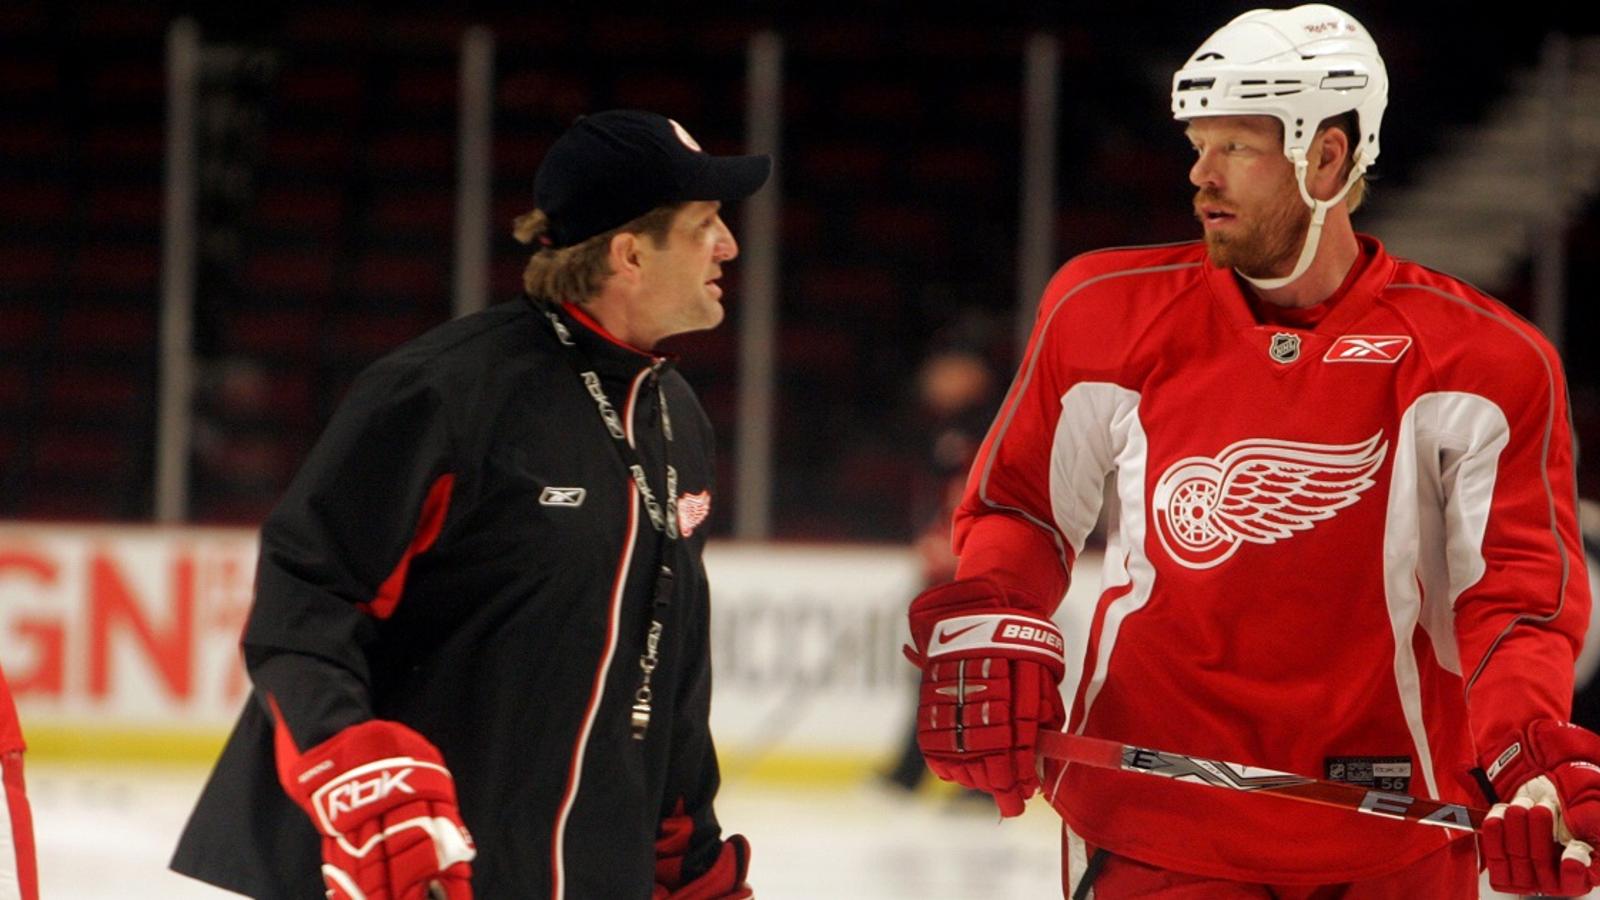 Chris Chelios details horrific abuse suffered by Johan Franzen at the hands of Mike Babcock.